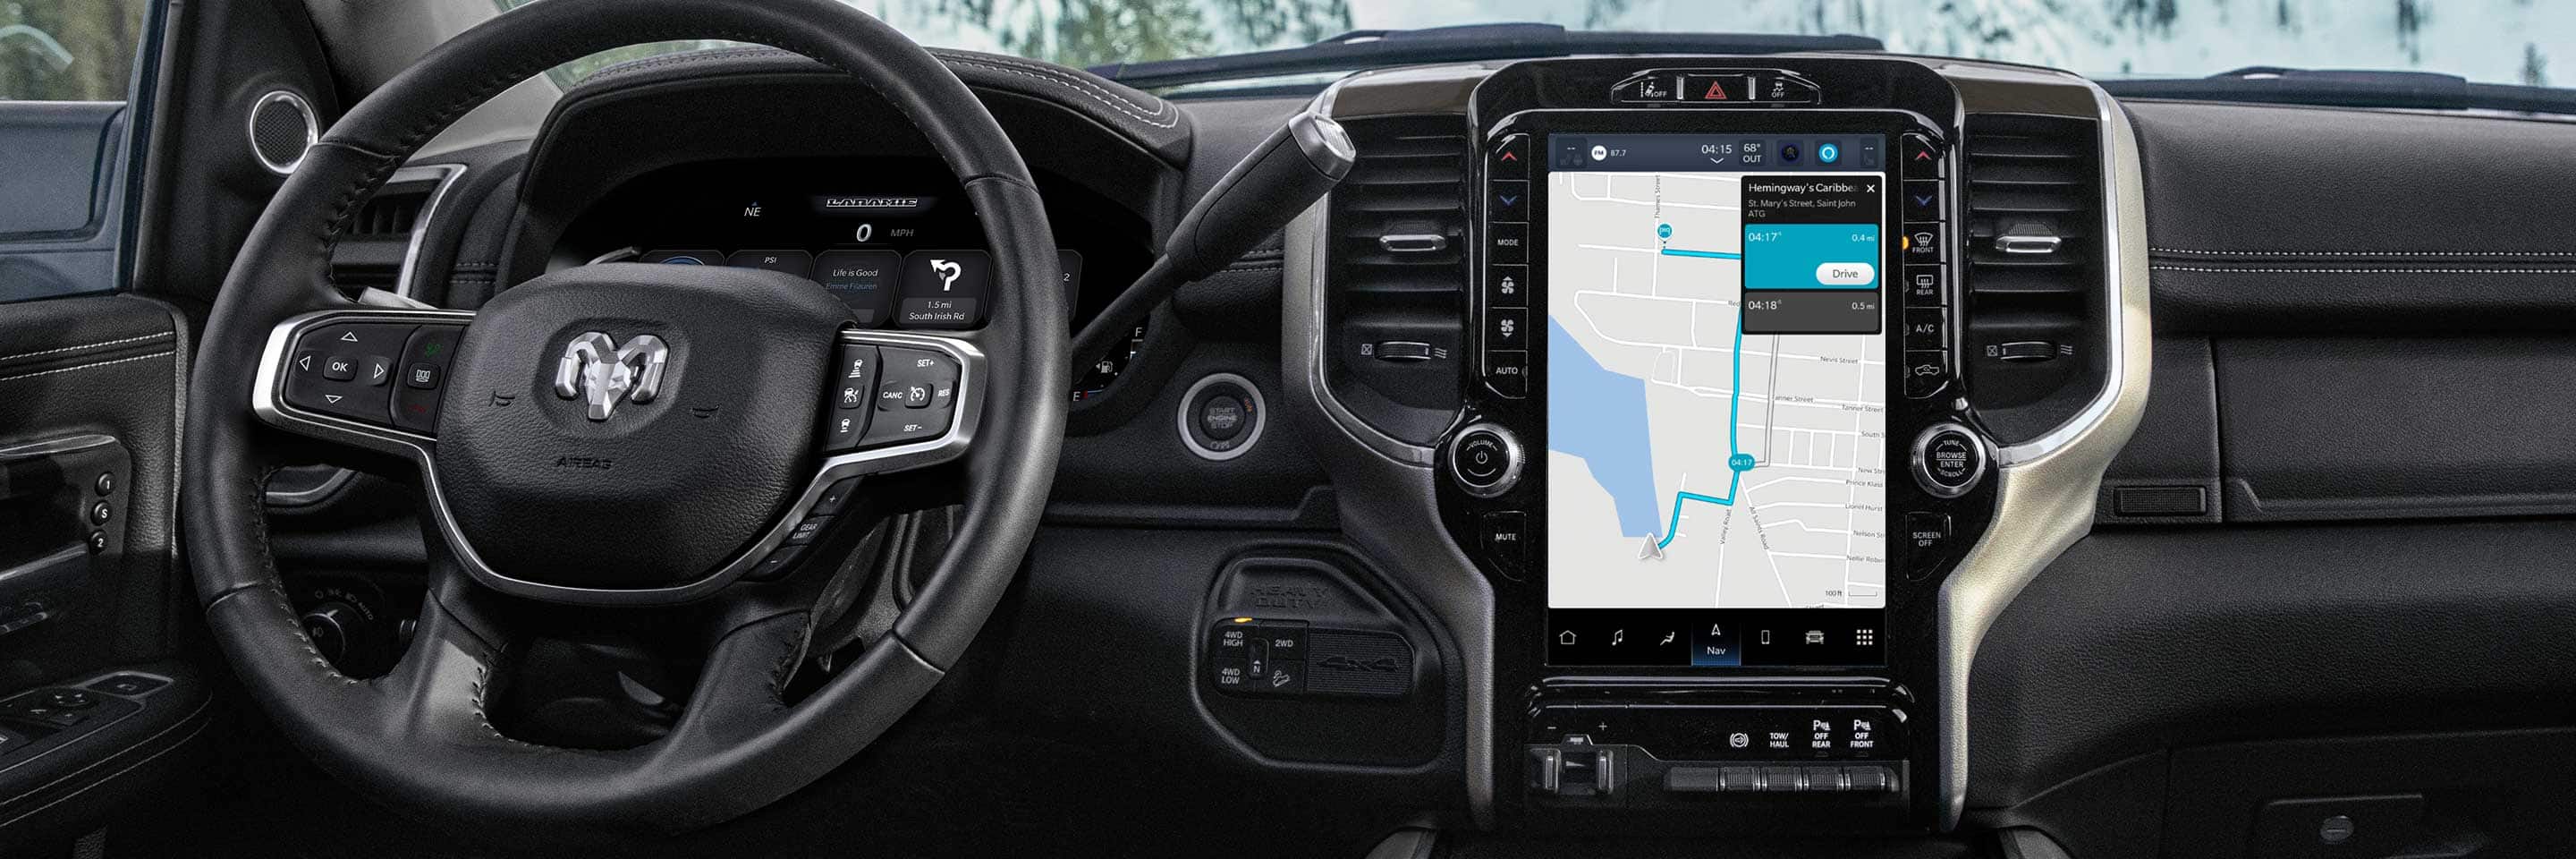 The steering wheel and Uconnect touchscreen in the 2023 Ram 3500 Laramie, with the screen displaying a navigation map.